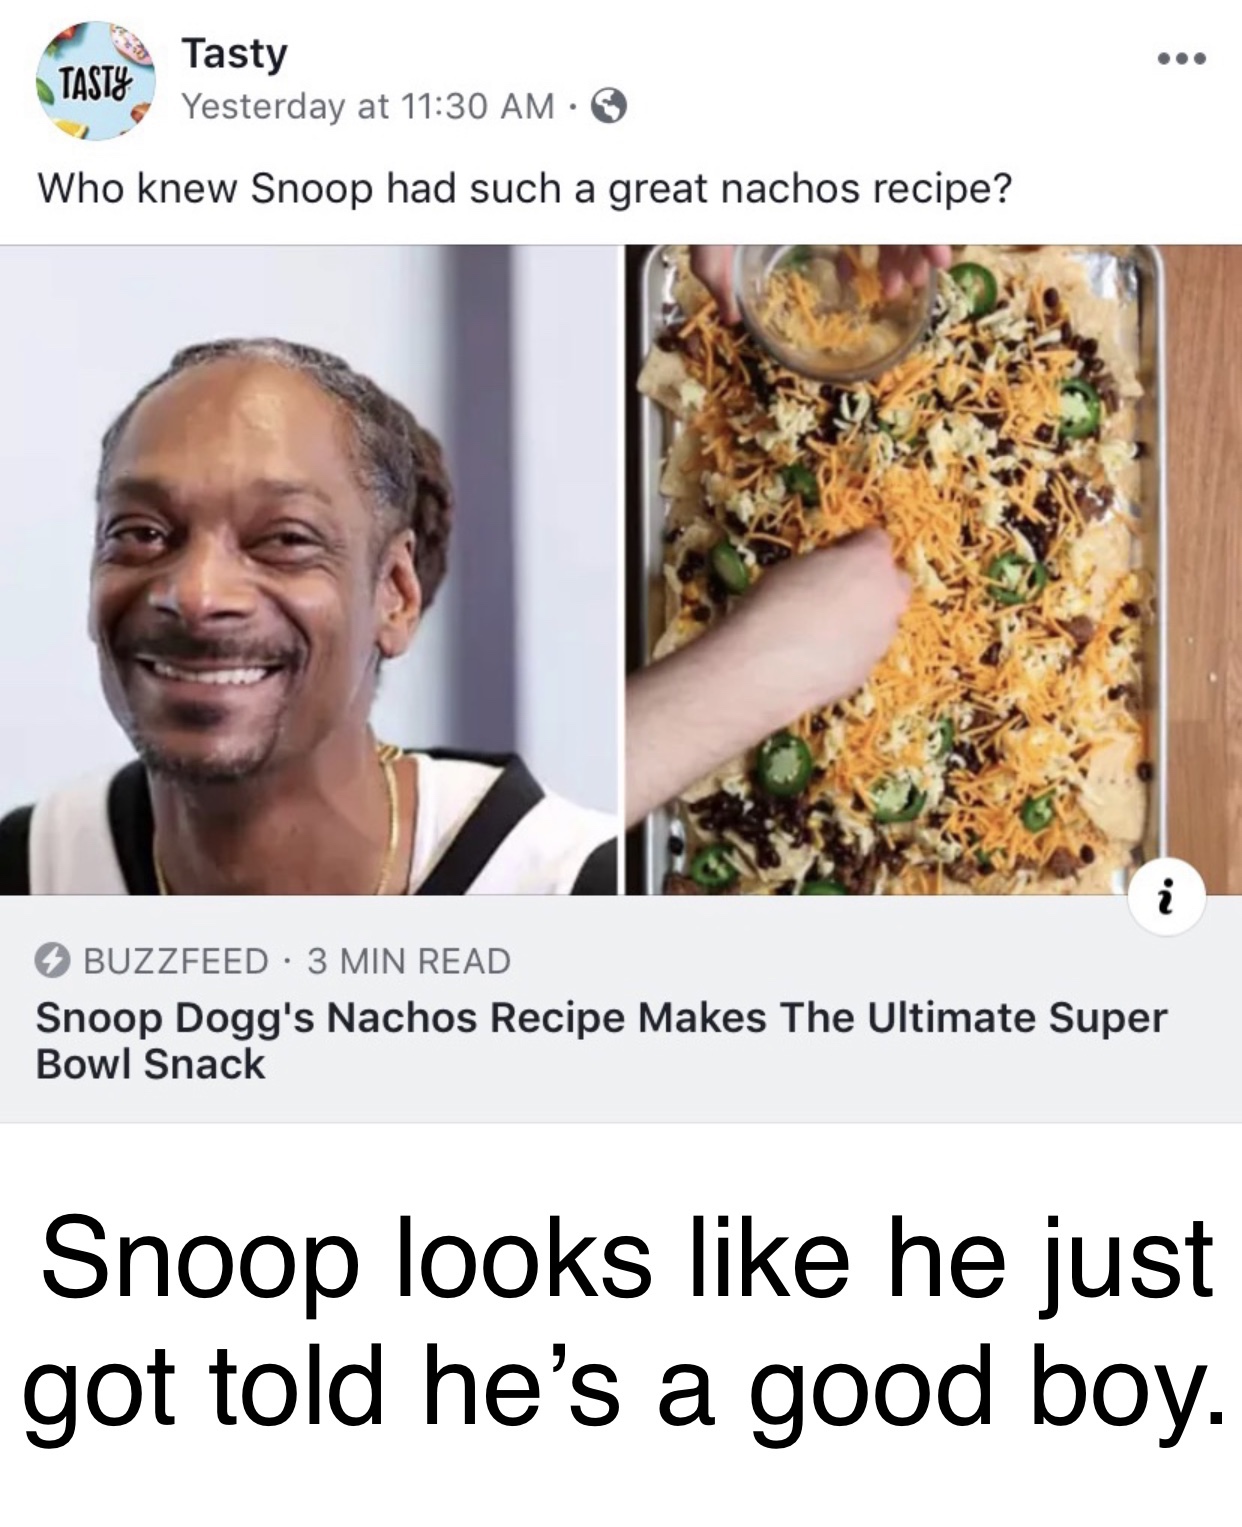 snoop dogg good boy meme - Tasty Tasty Yesterday at Who knew Snoop had such a great nachos recipe? Buzzfeed 3 Min Read Snoop Dogg's Nachos Recipe Makes The Ultimate Super Bowl Snack Snoop looks he just got told he's a good boy.